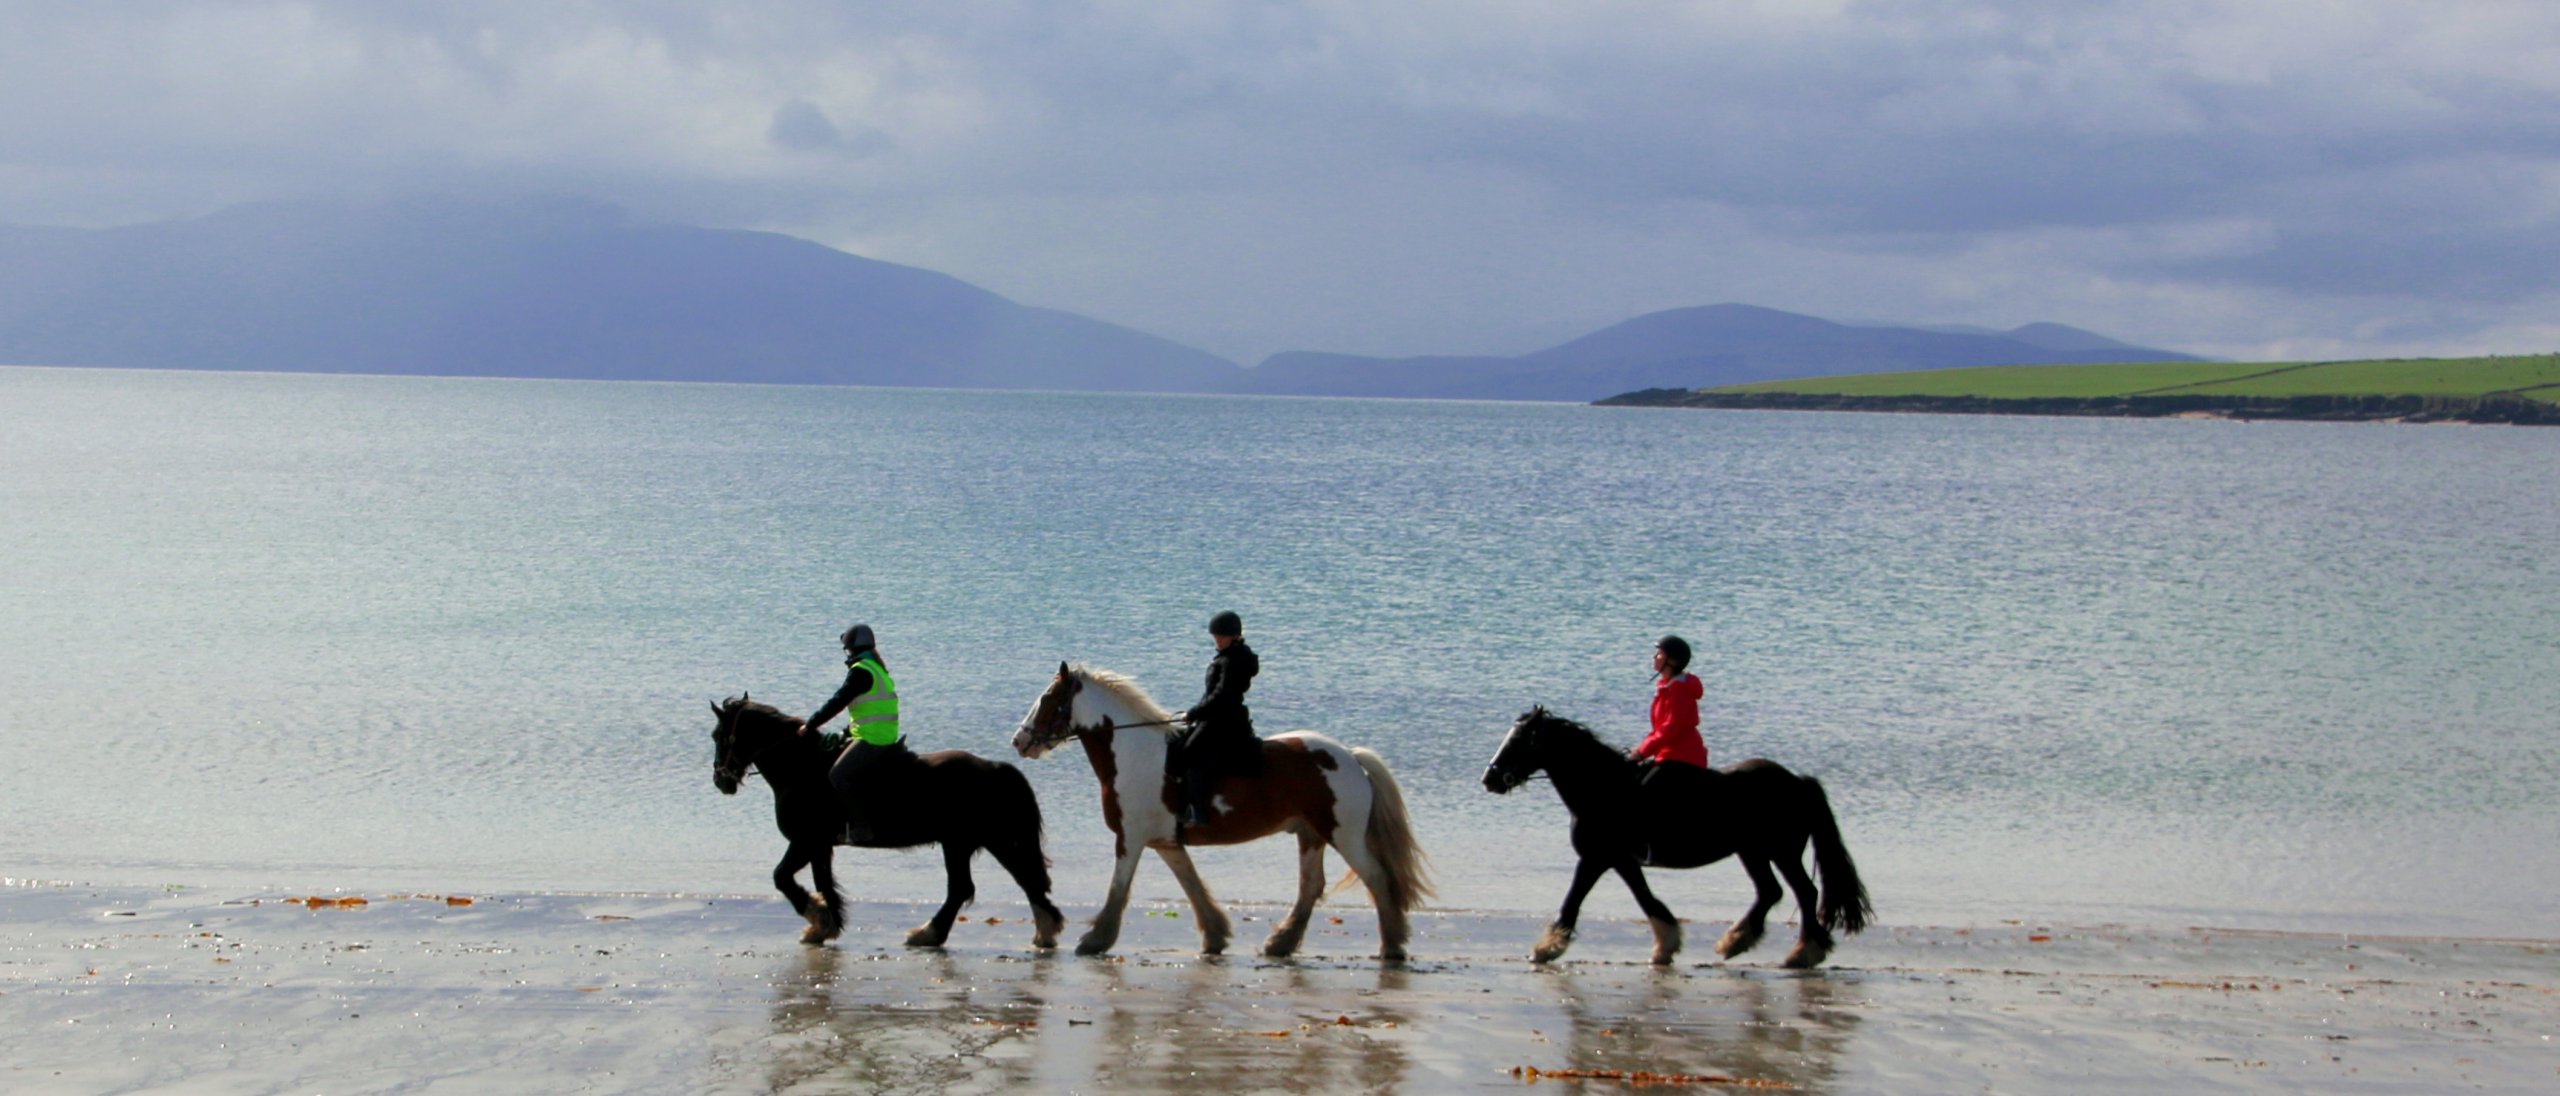 Horseback riders on a scenic beach while on an adventure tour of Ireland